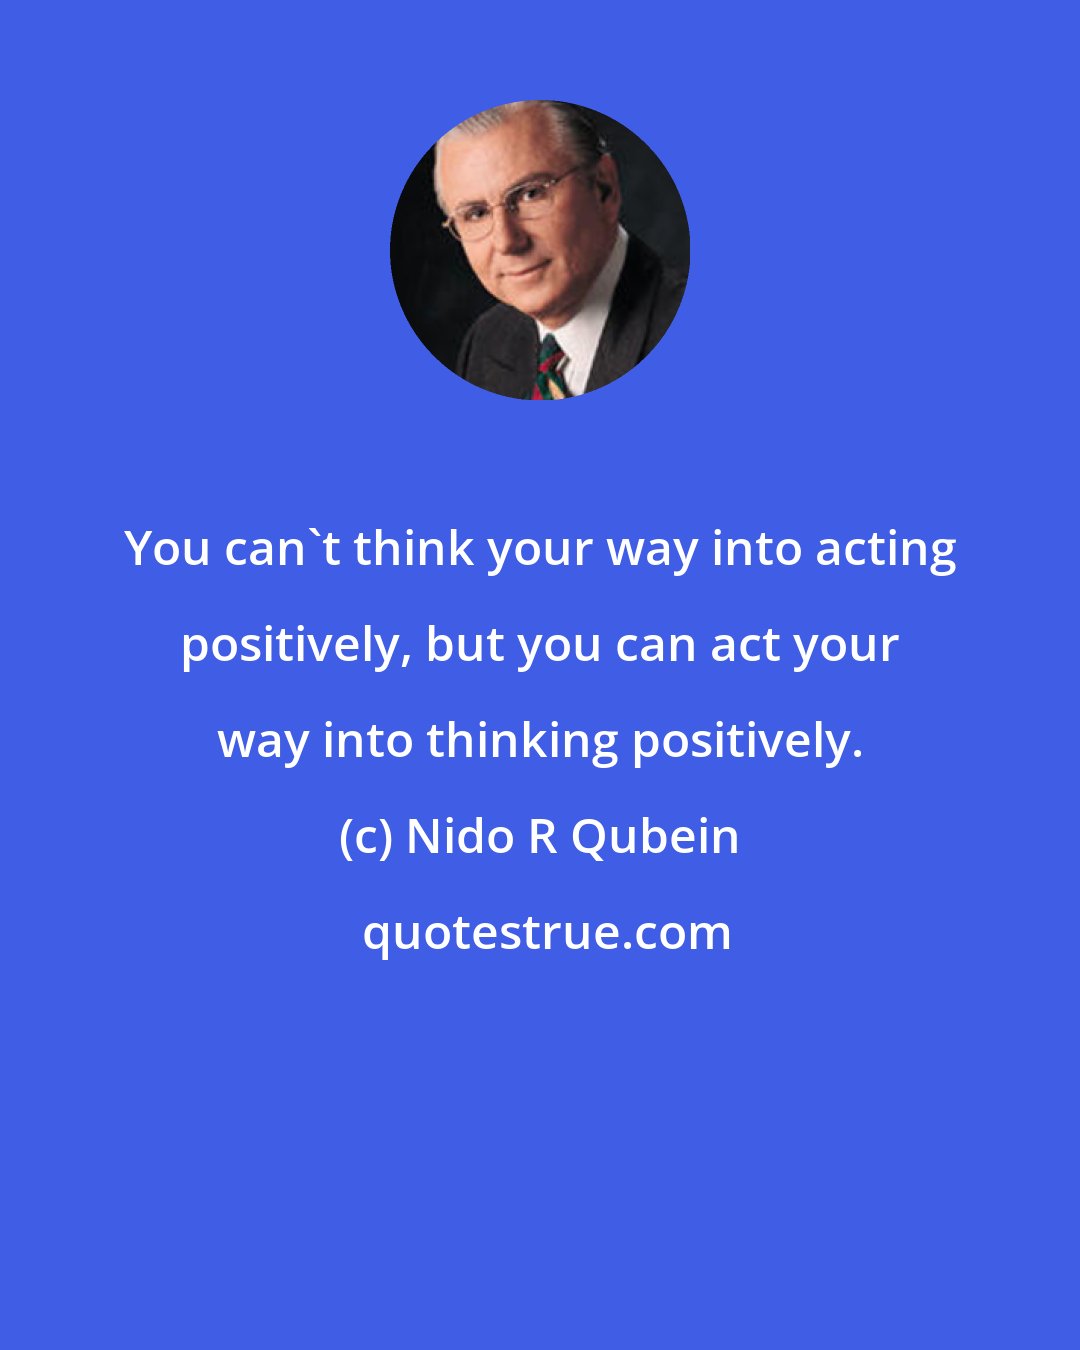 Nido R Qubein: You can't think your way into acting positively, but you can act your way into thinking positively.